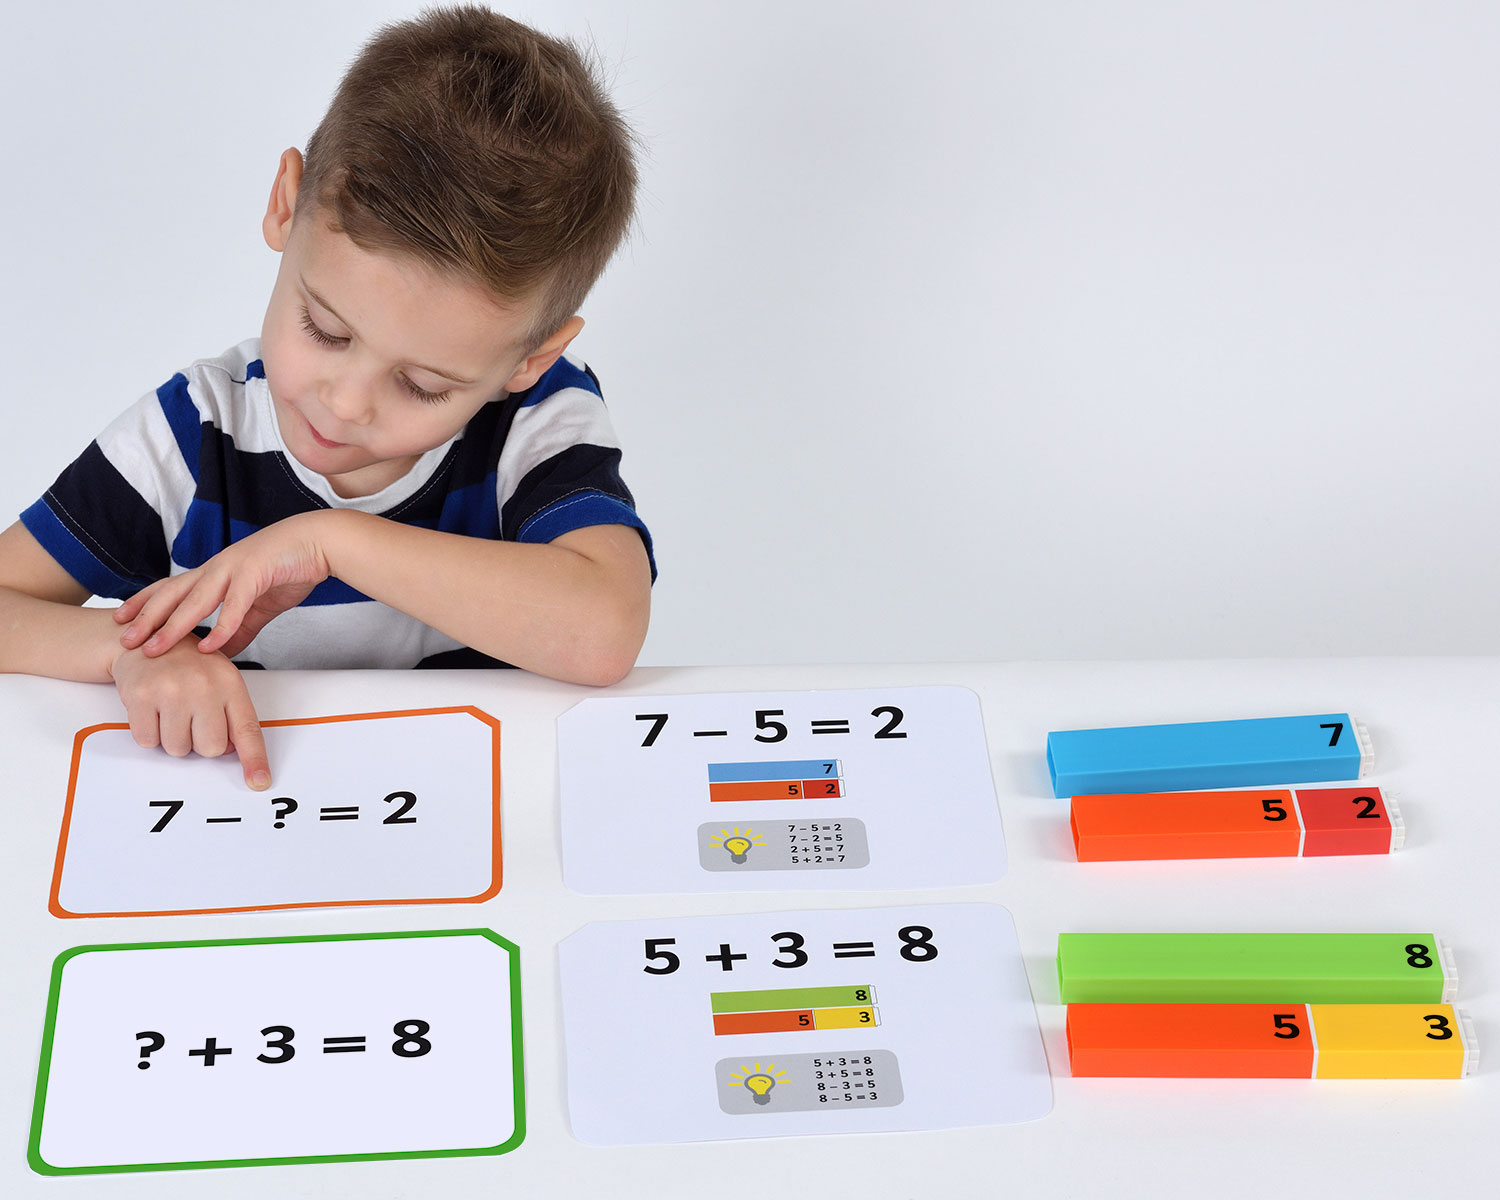 Connecting Number Rods Addition & Subtraction 1-20 Cards